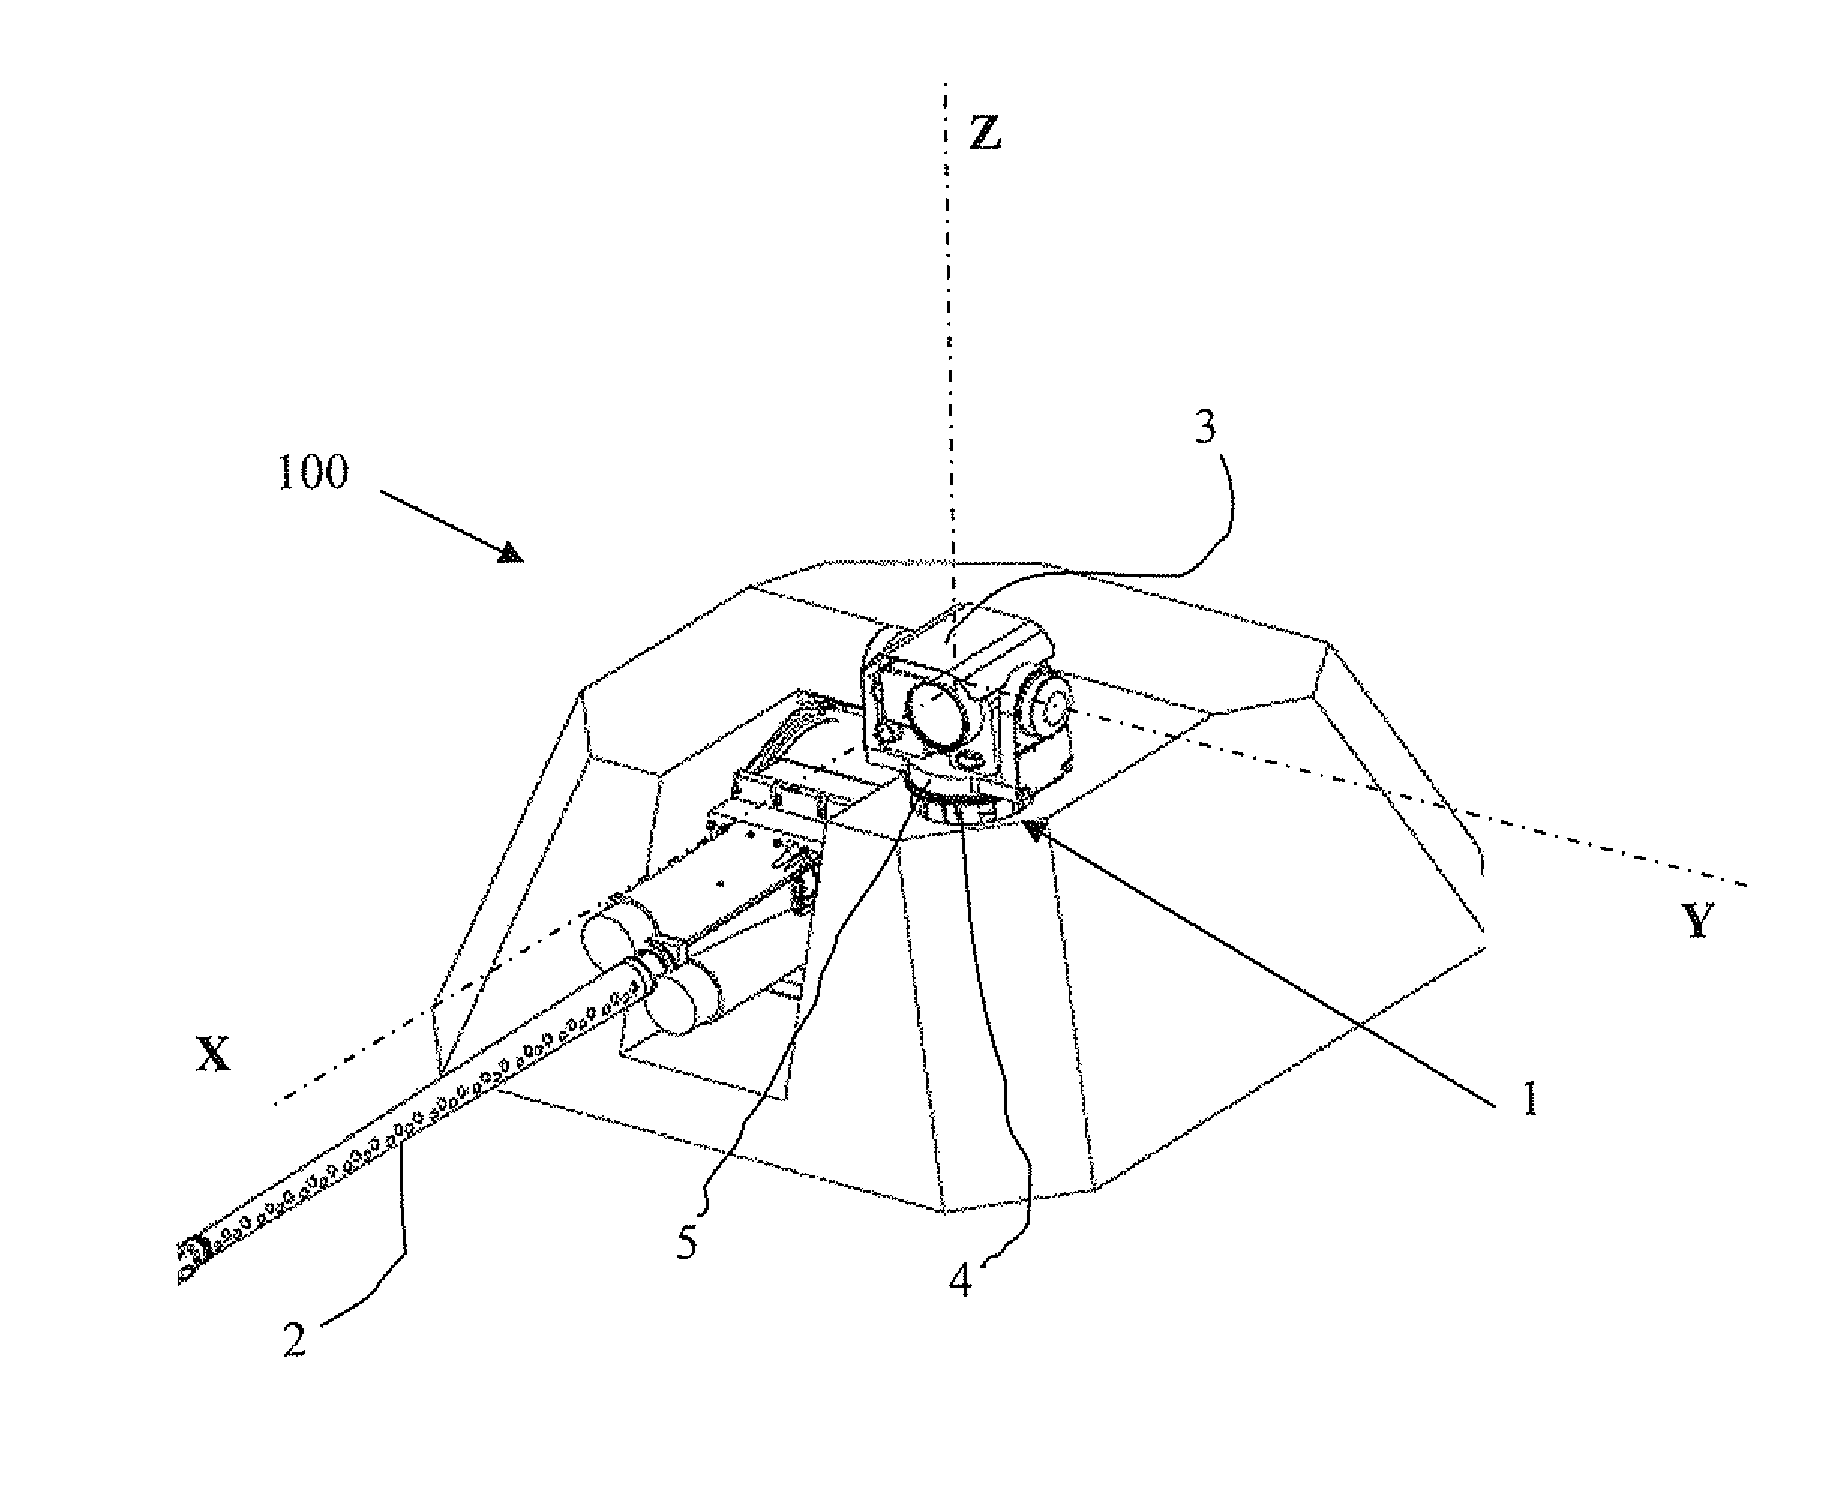 Support device for the gun sight of a military vehicle